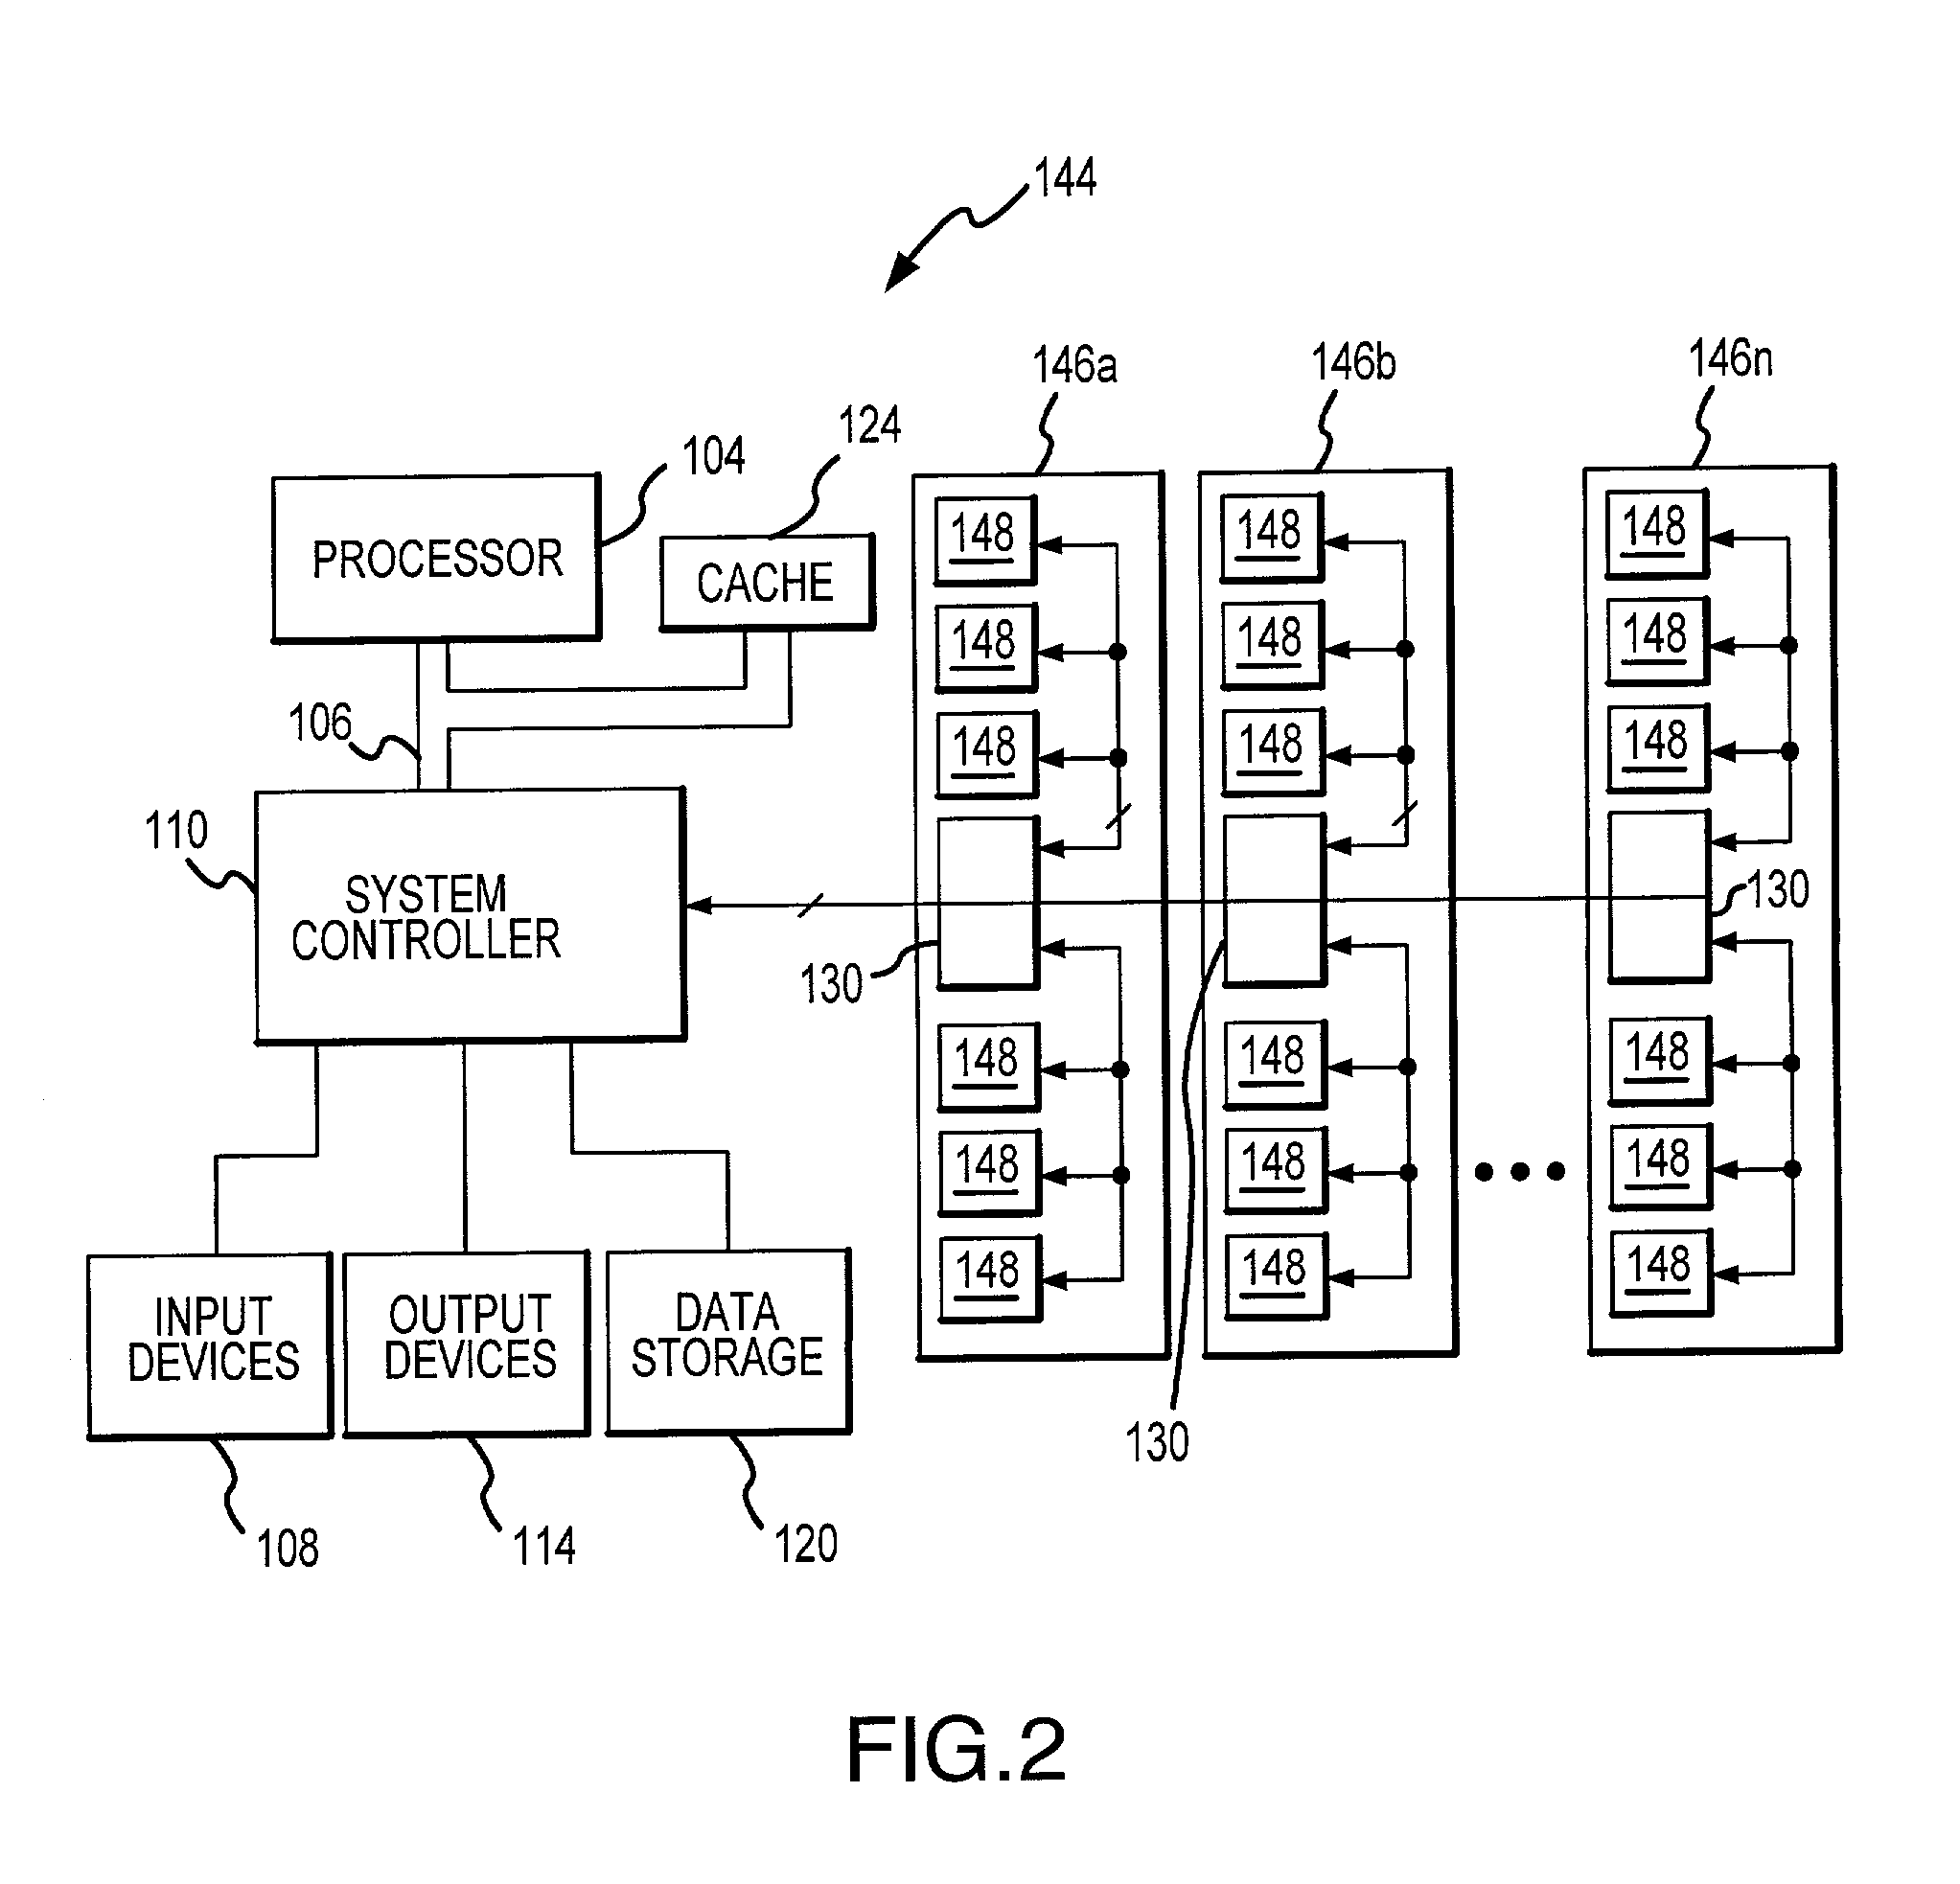 Memory hub with internal cache and/or memory access prediction